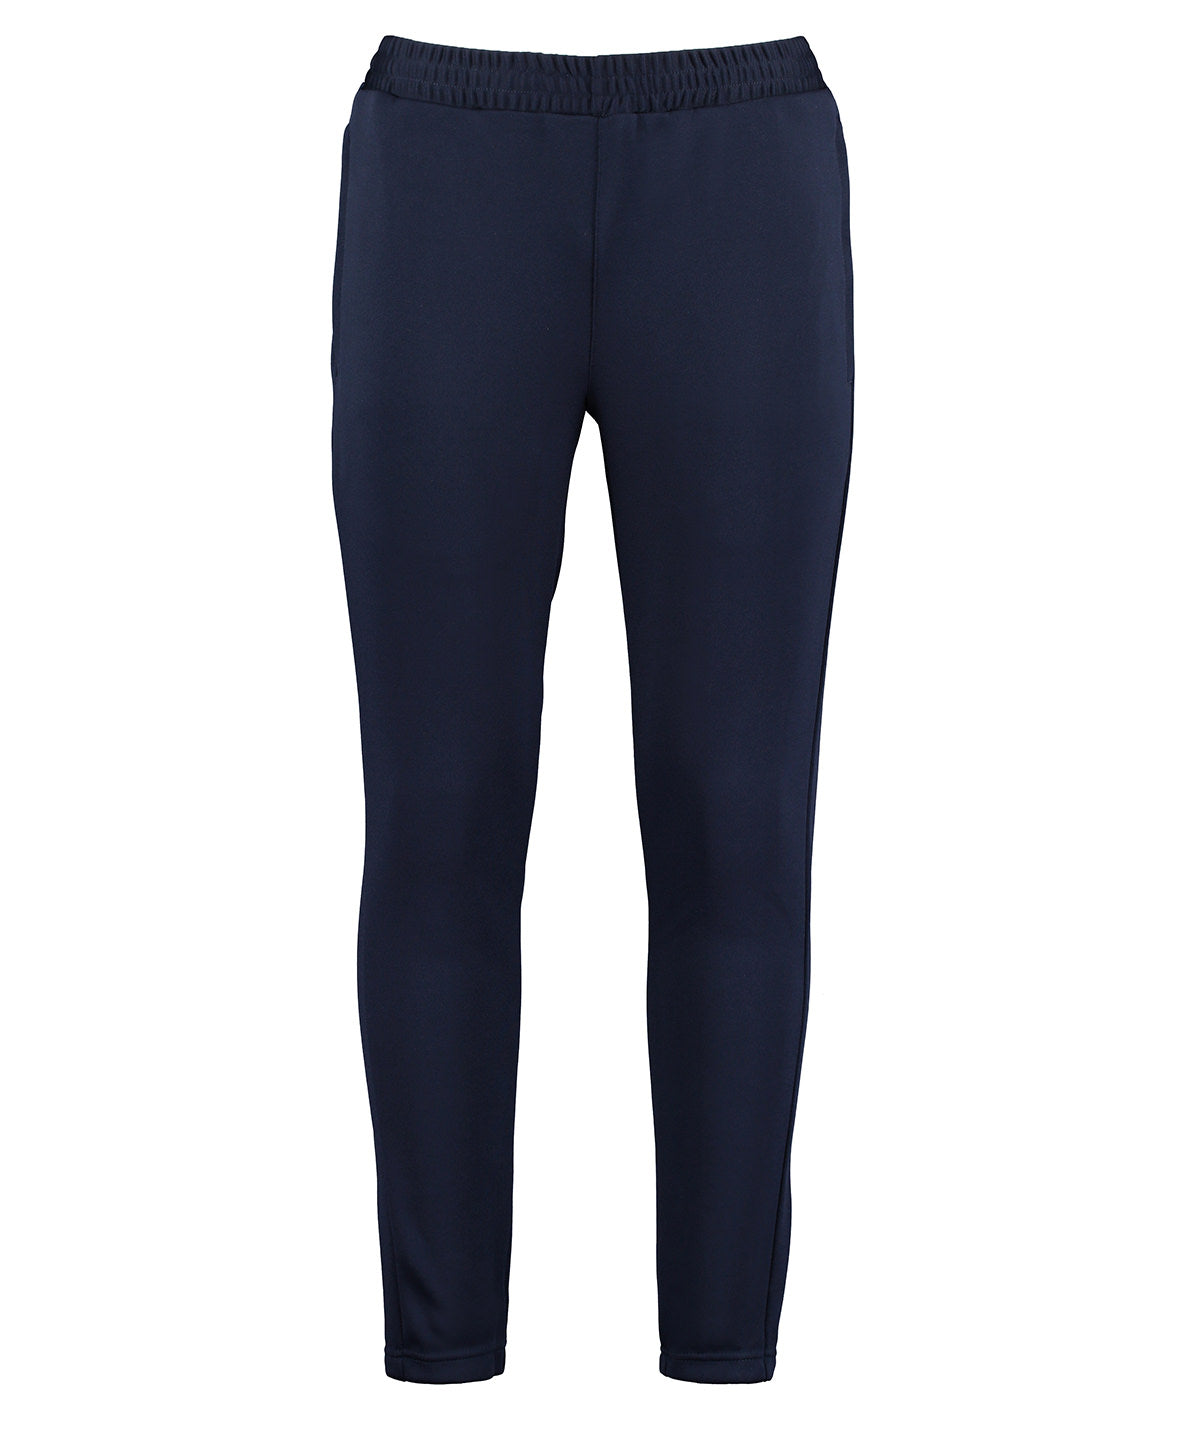 Personalised Trousers - Navy GameGear Gamegear® track pant (slim fit)